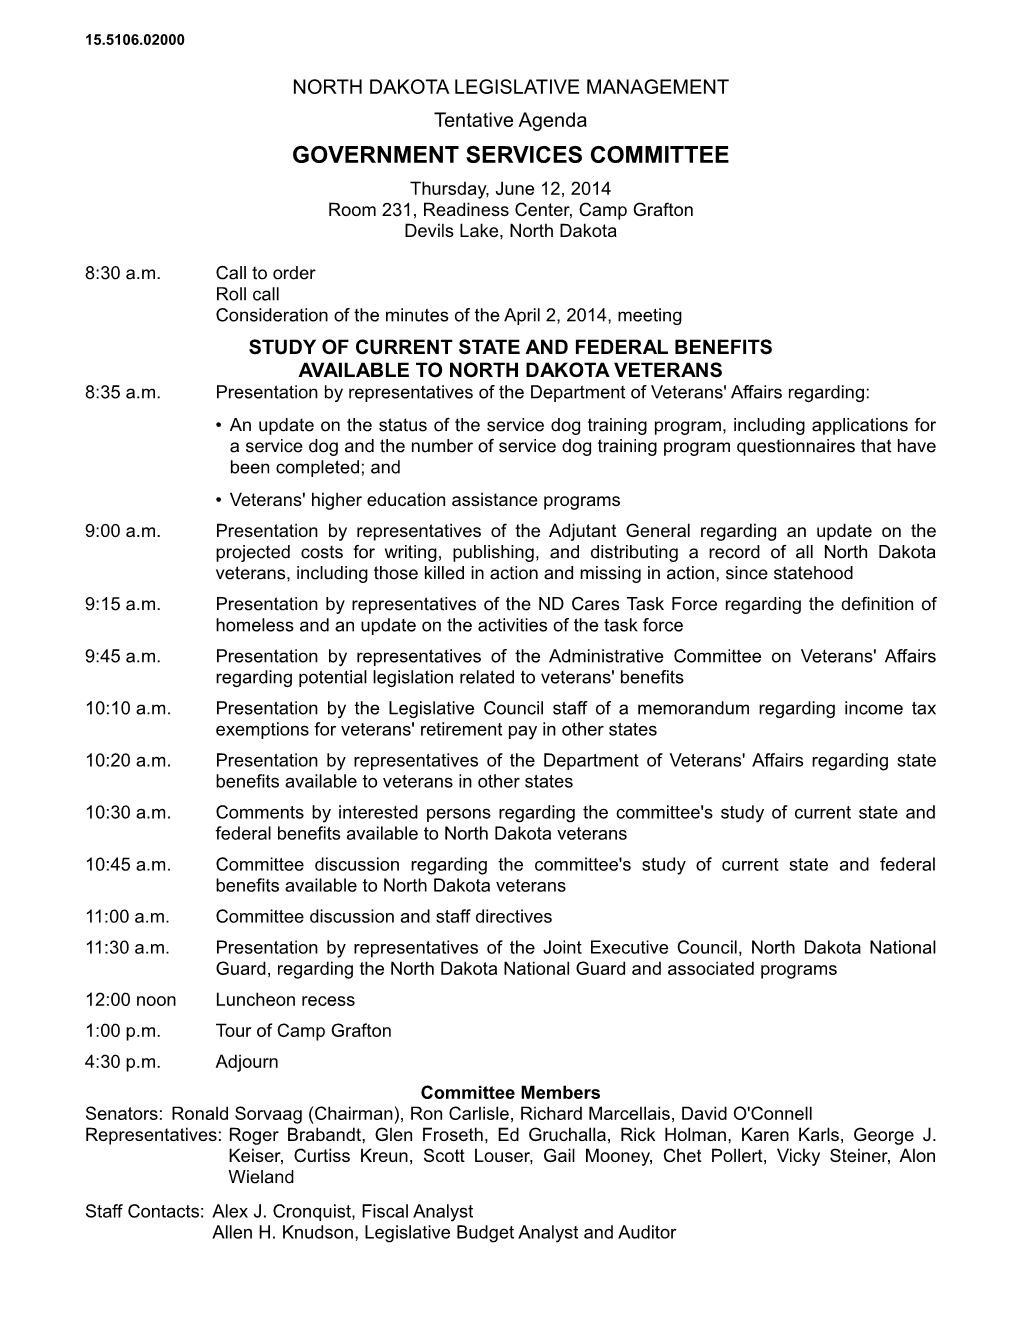 GOVERNMENT SERVICES COMMITTEE Thursday, June 12, 2014 Room 231, Readiness Center, Camp Grafton Devils Lake, North Dakota